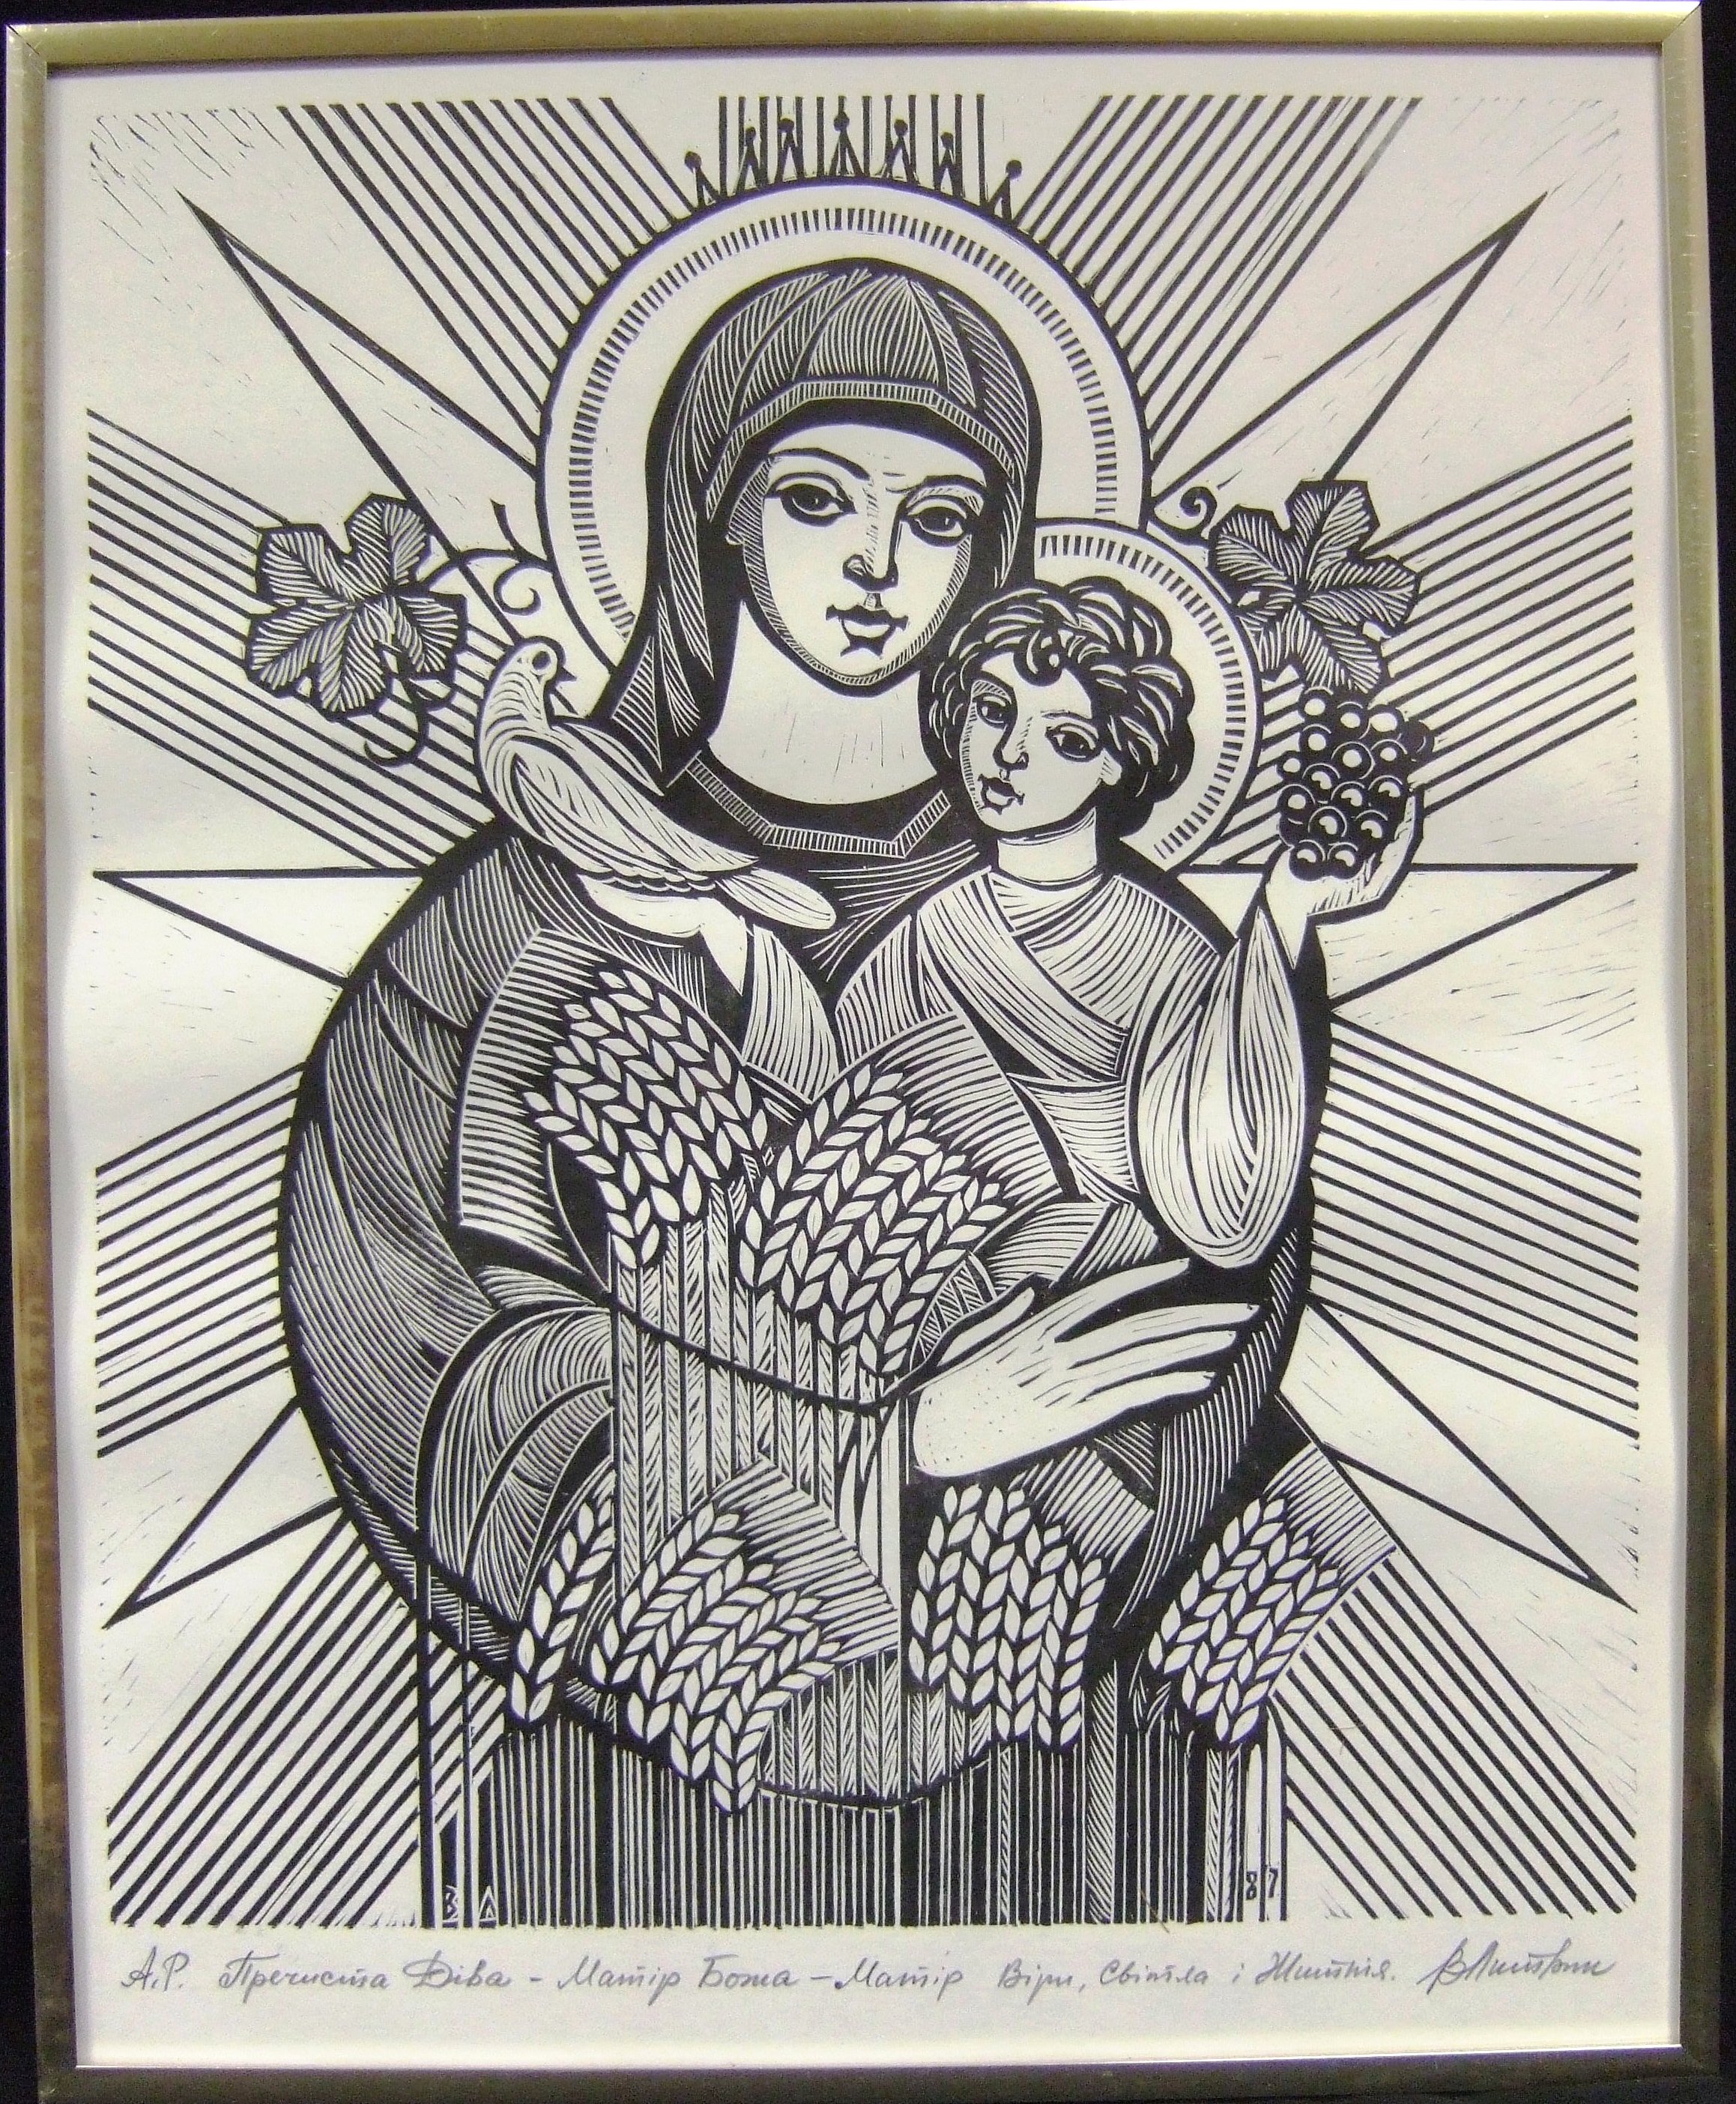 ?Mother of Faith, Light and Life.? Woodcut print by Vitali Lytvyn. Ontario, 1987. Marian Library.